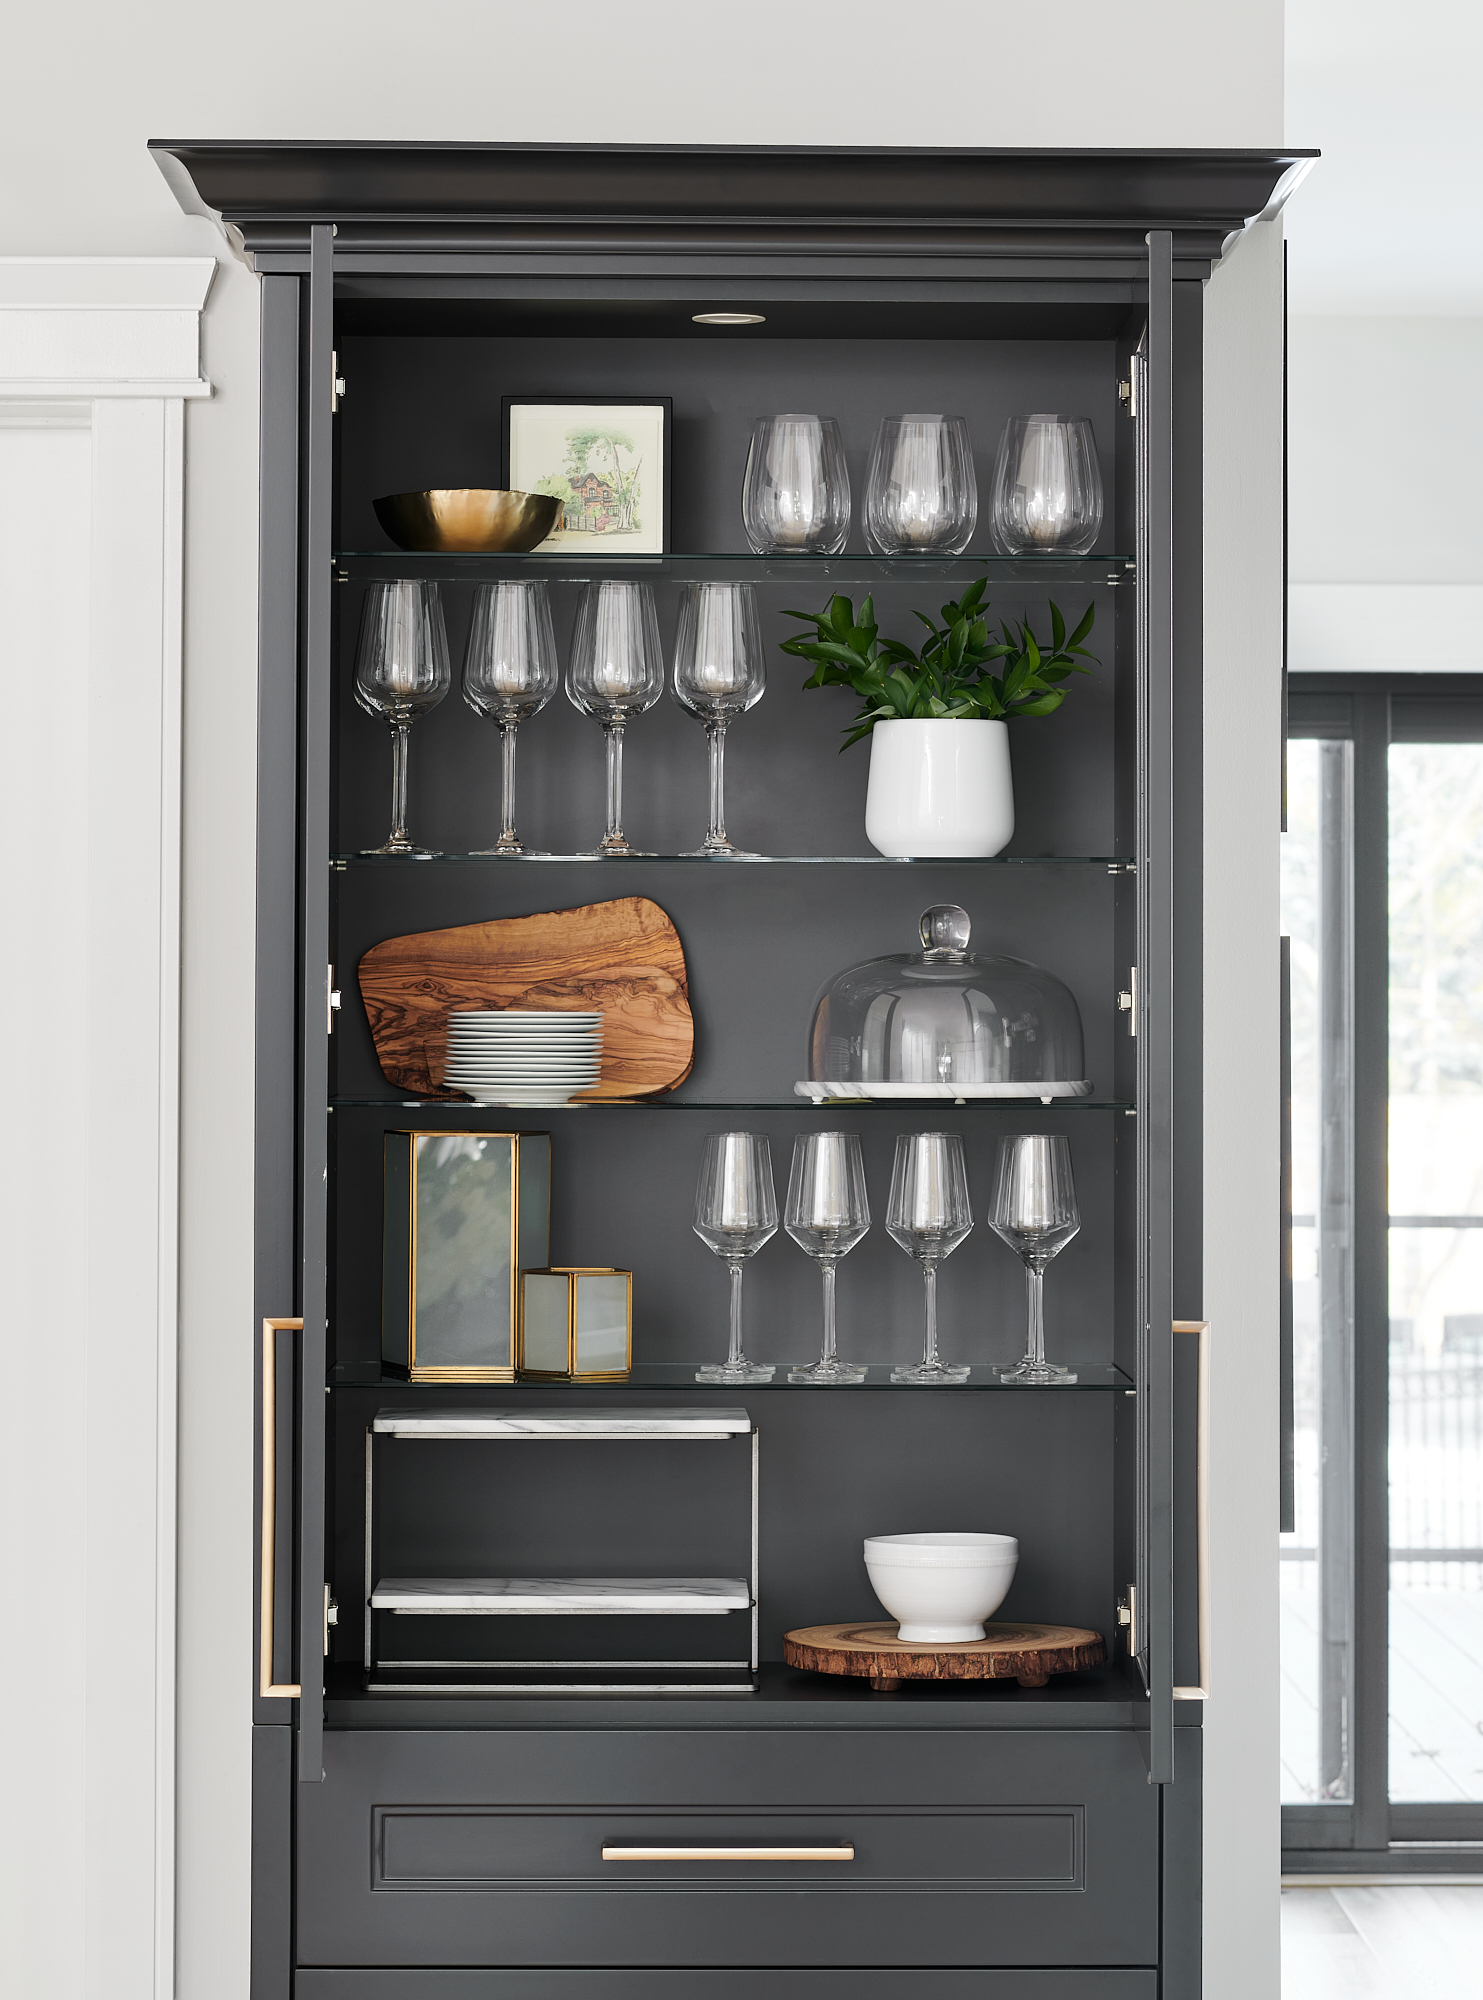 custom cabinet styled with wine glasses, serving trays, and greenery